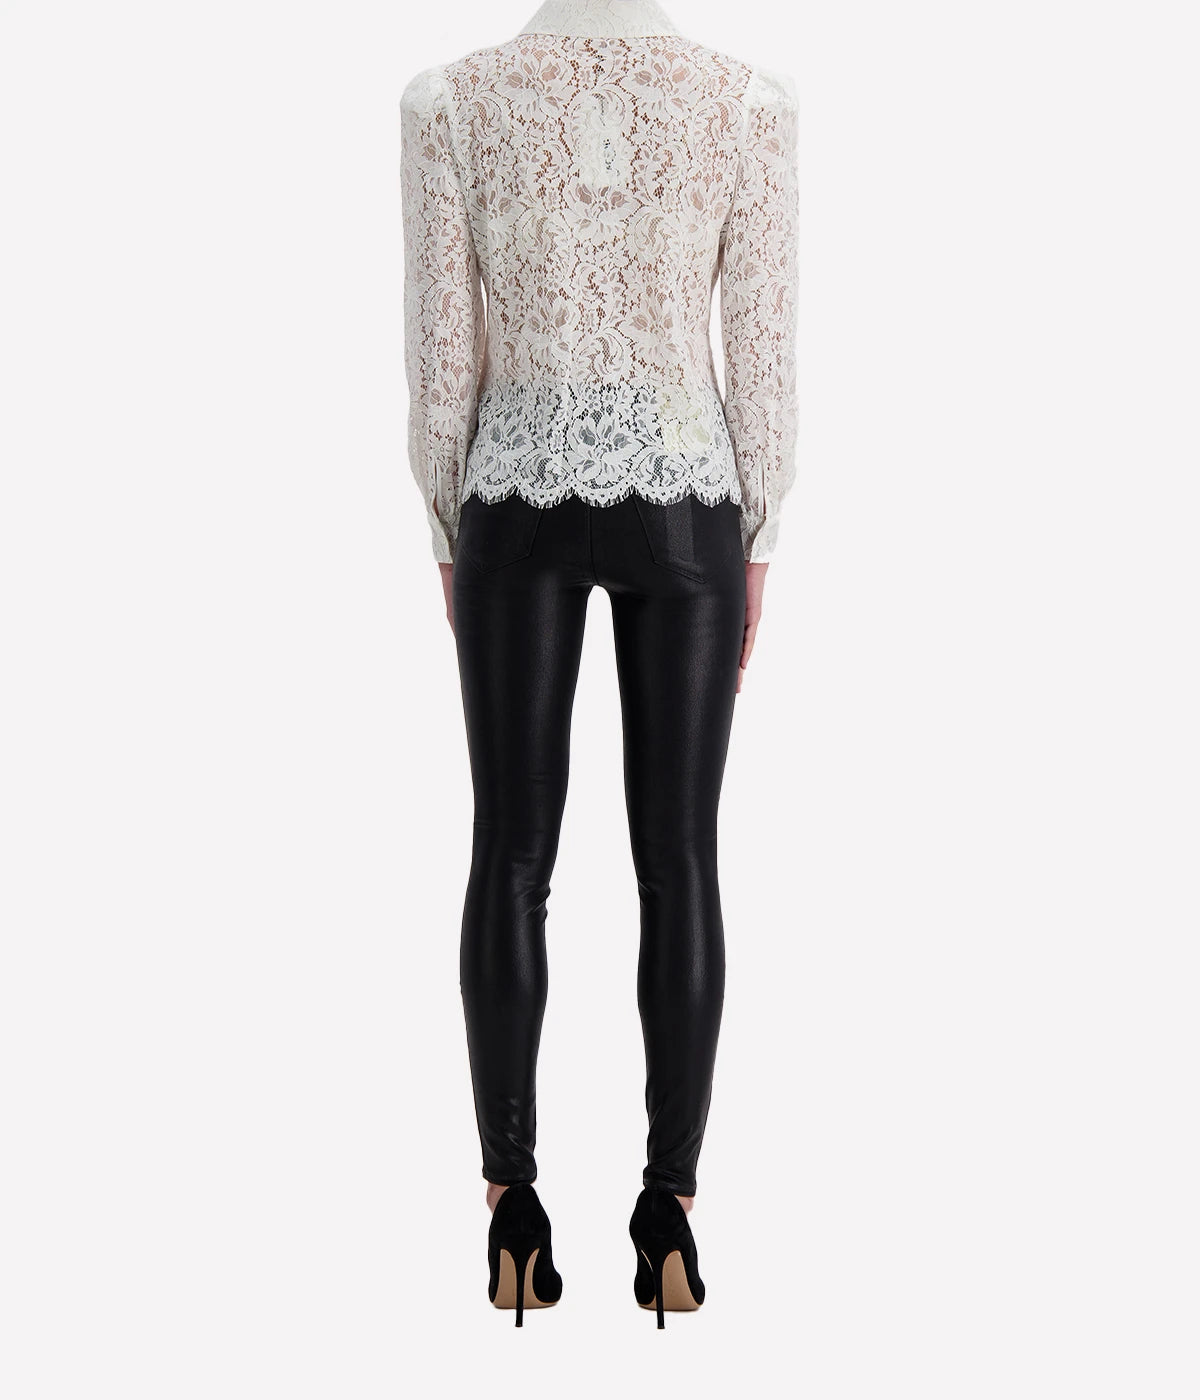 Jenica Lace Shirt in Ivory